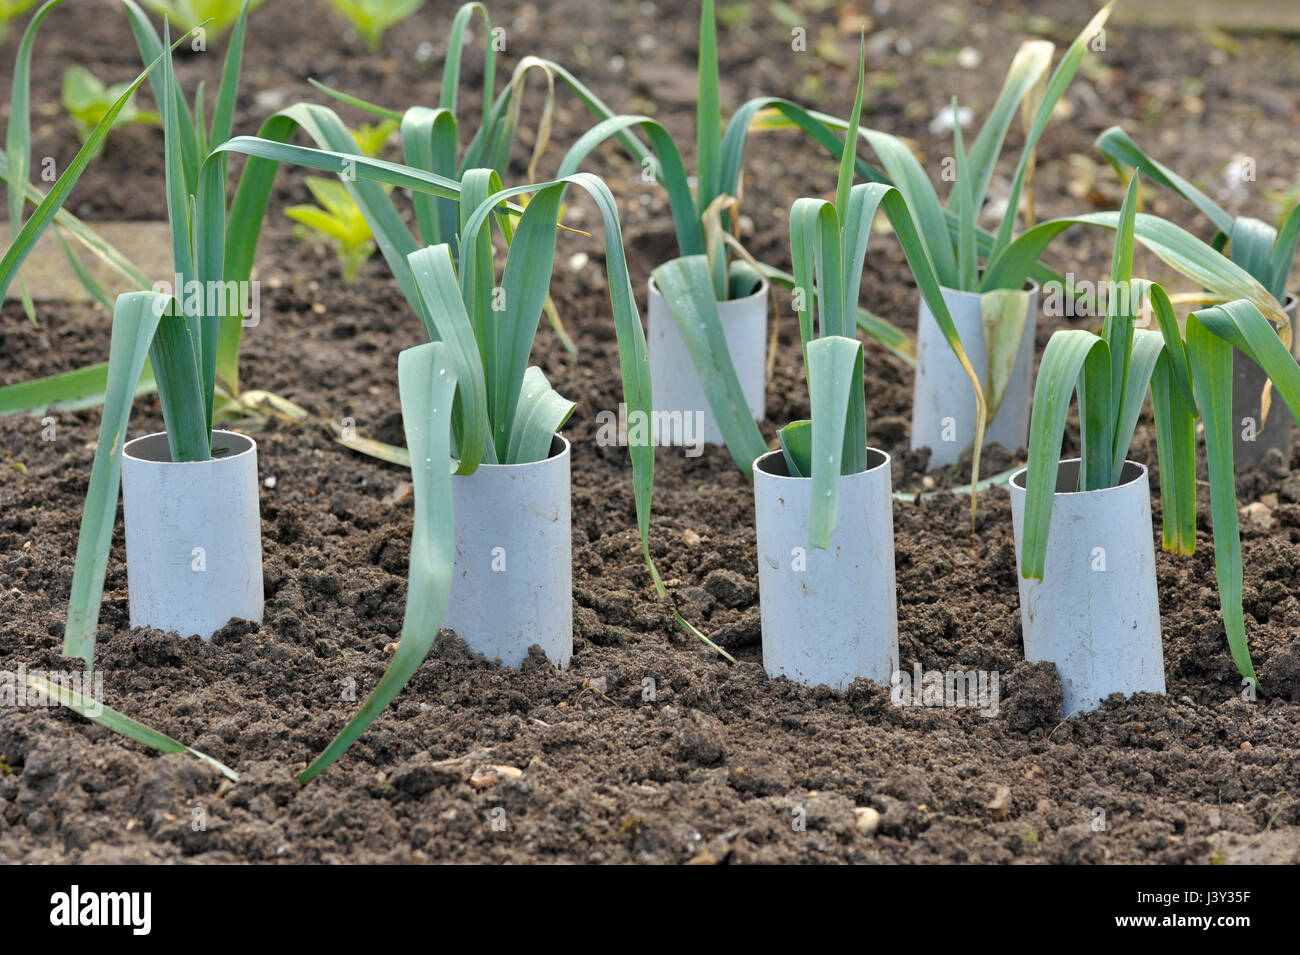 Leeks, allium ampeloprasum growing in plastic pipes to blanch and extend the stems in a vegetable garden, variety Musselburgh. Stock Photo